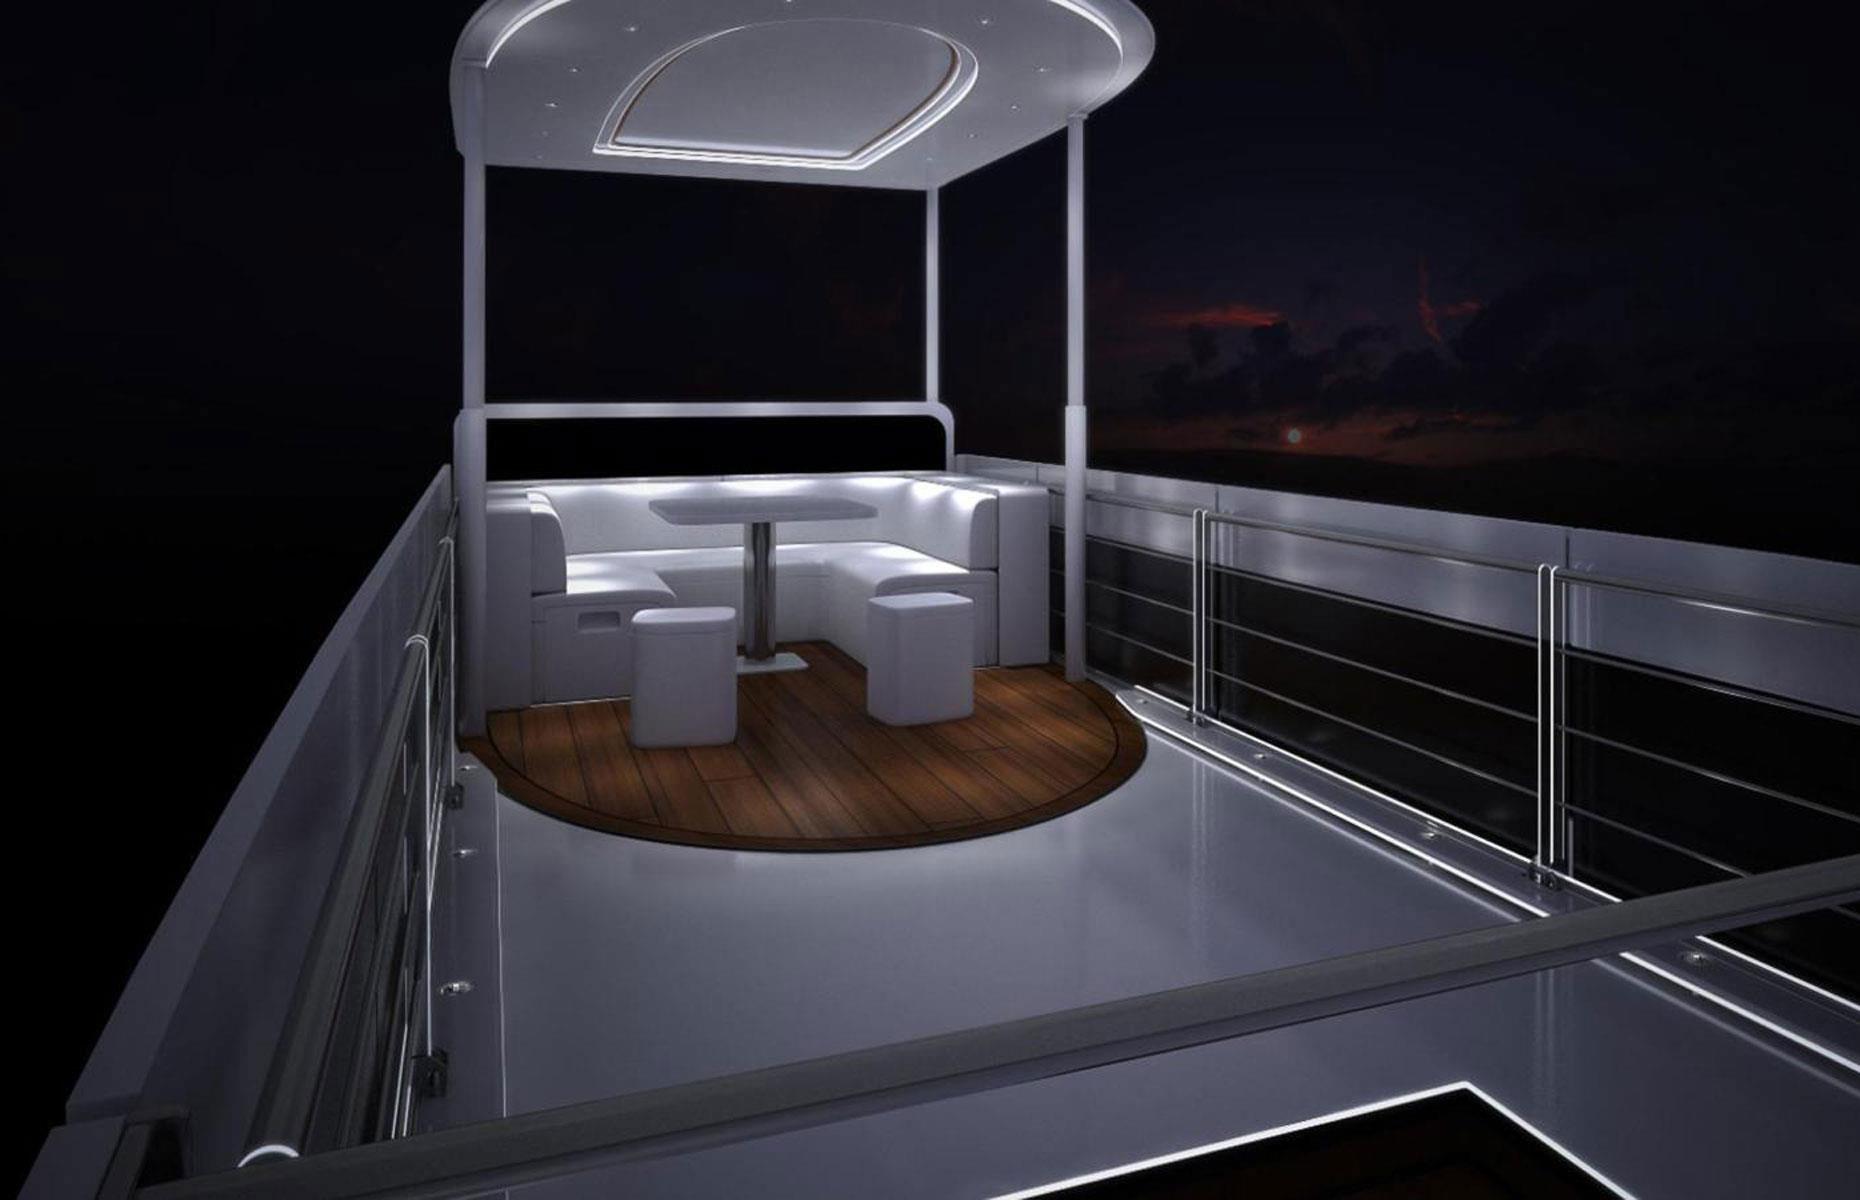 <p>Like the Commander 8x8, the motorhome's most outstanding feature is its retractable roof. It can be instantly raised to conjure up a rooftop nightclub.</p>  <p>This glamorous Sky Lounge is a party-lover's dream, with a heated dancefloor, a covered seating area and a top-of-the-range Steinway Lyngdorf music system.</p>